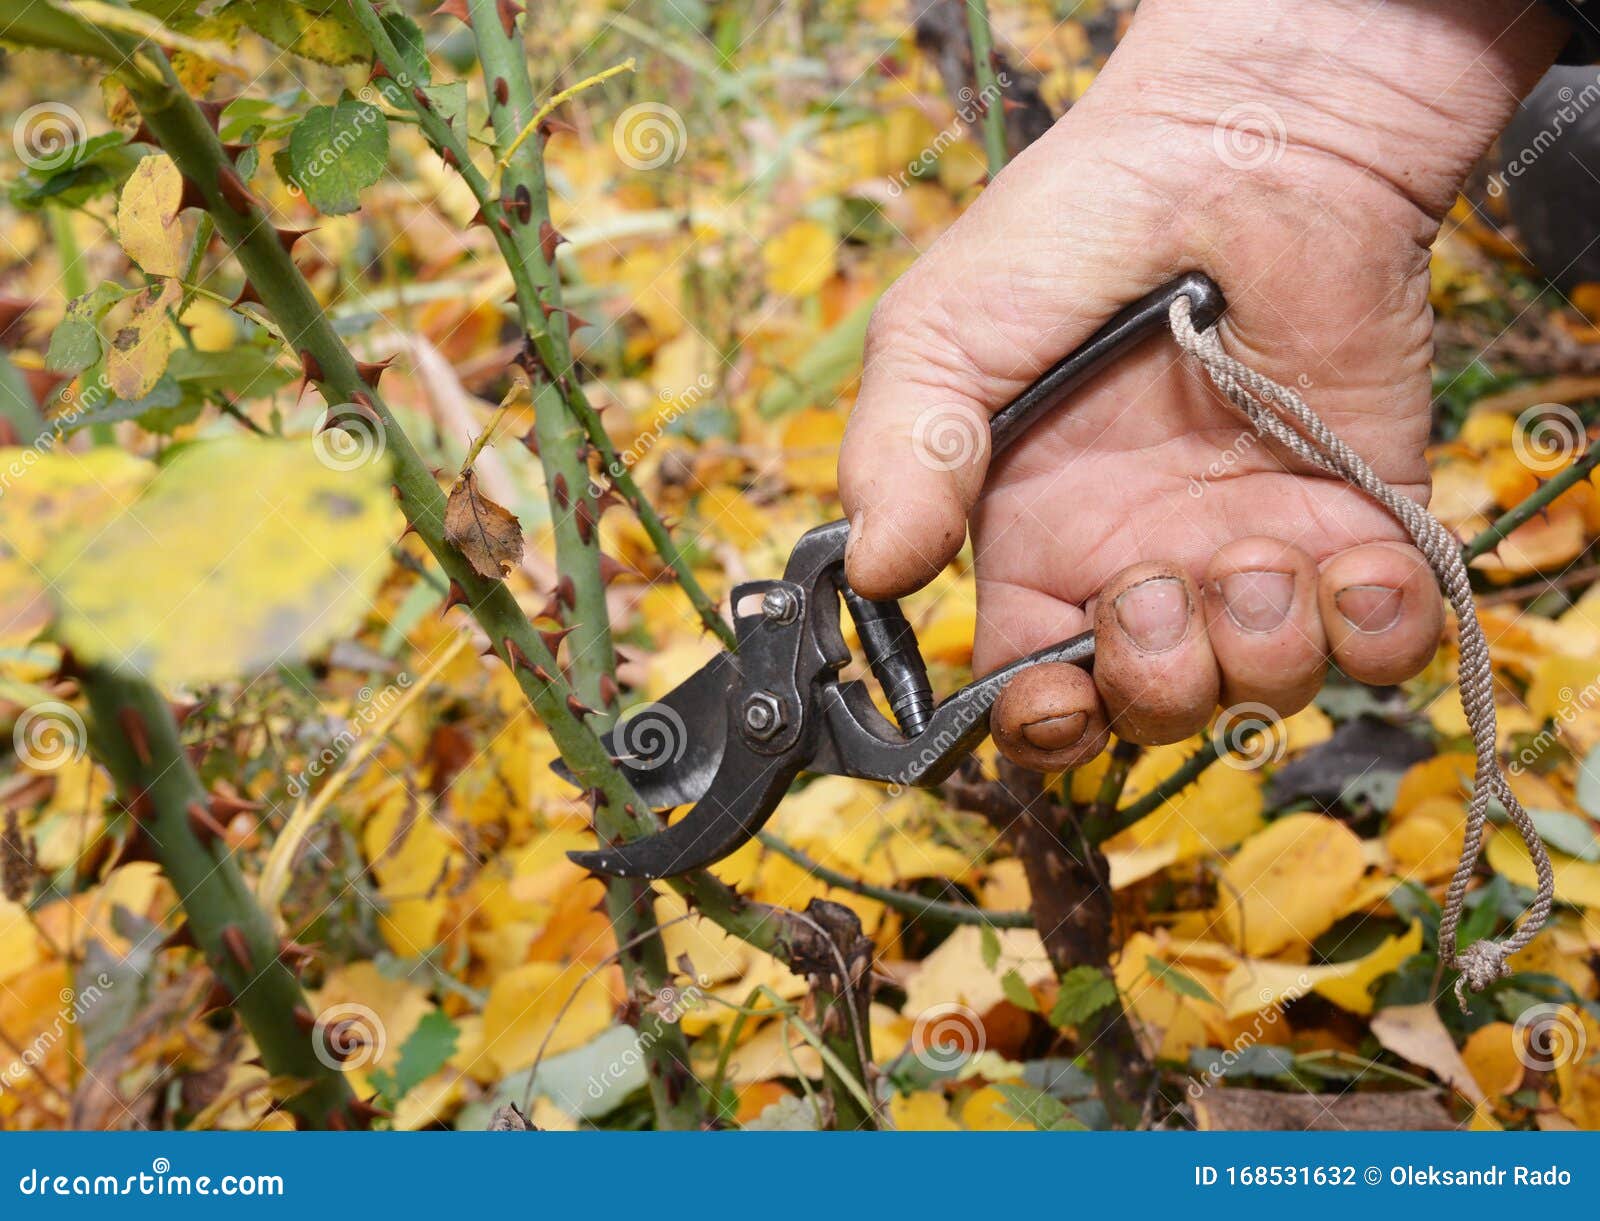 pruning tips to prevent wind-rock. shorten the stems of tall bush roses to reduce wind-rock during winter gales